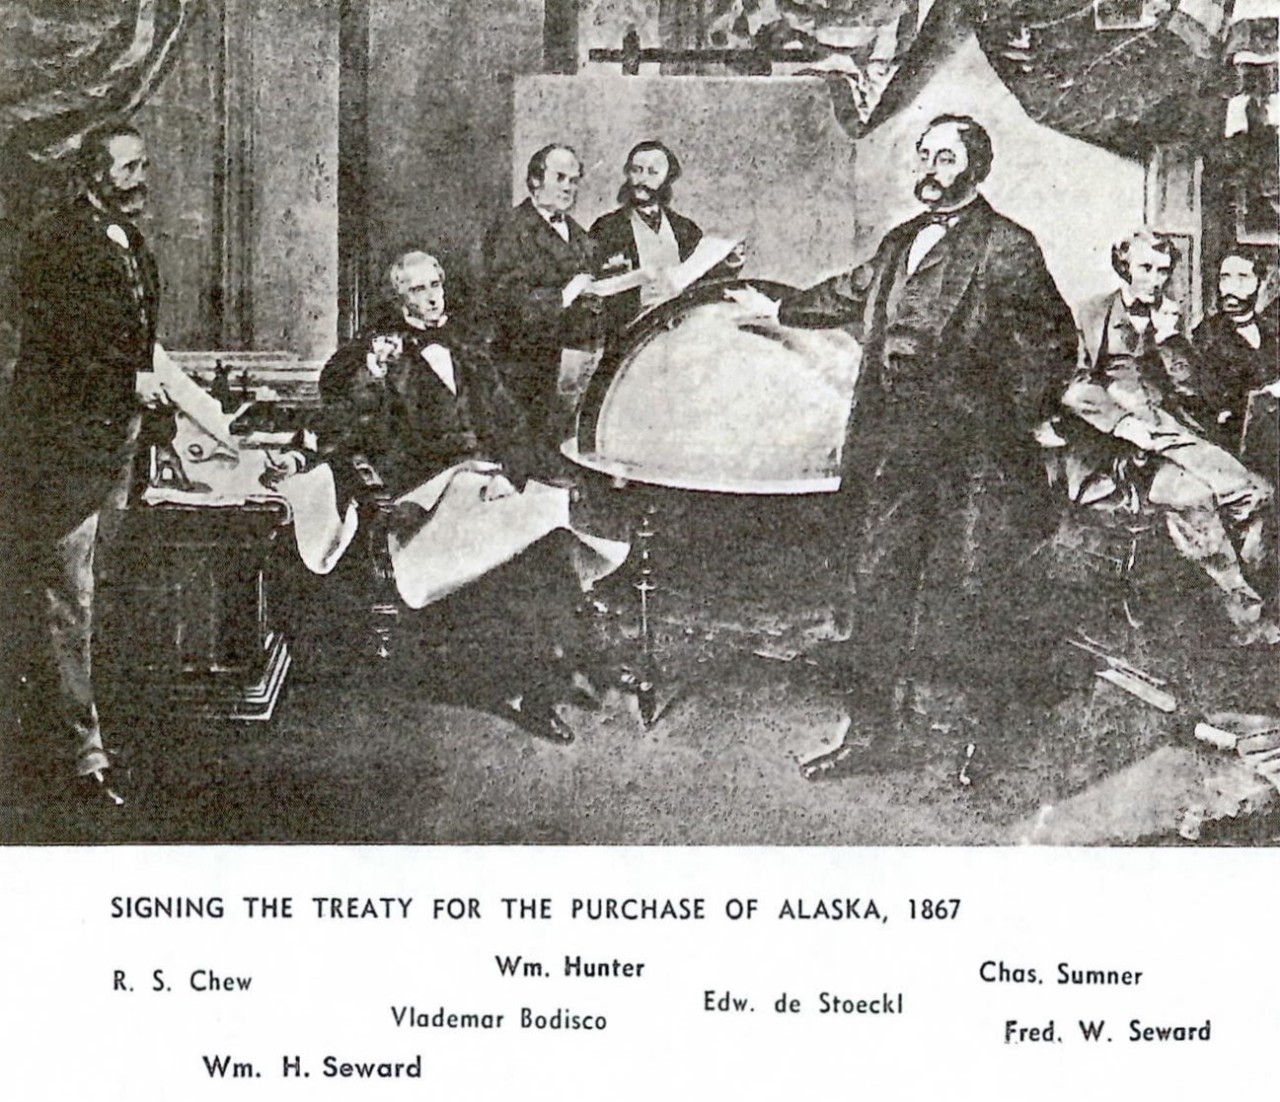 Signing the treaty for the purchase of Alaska, 1867